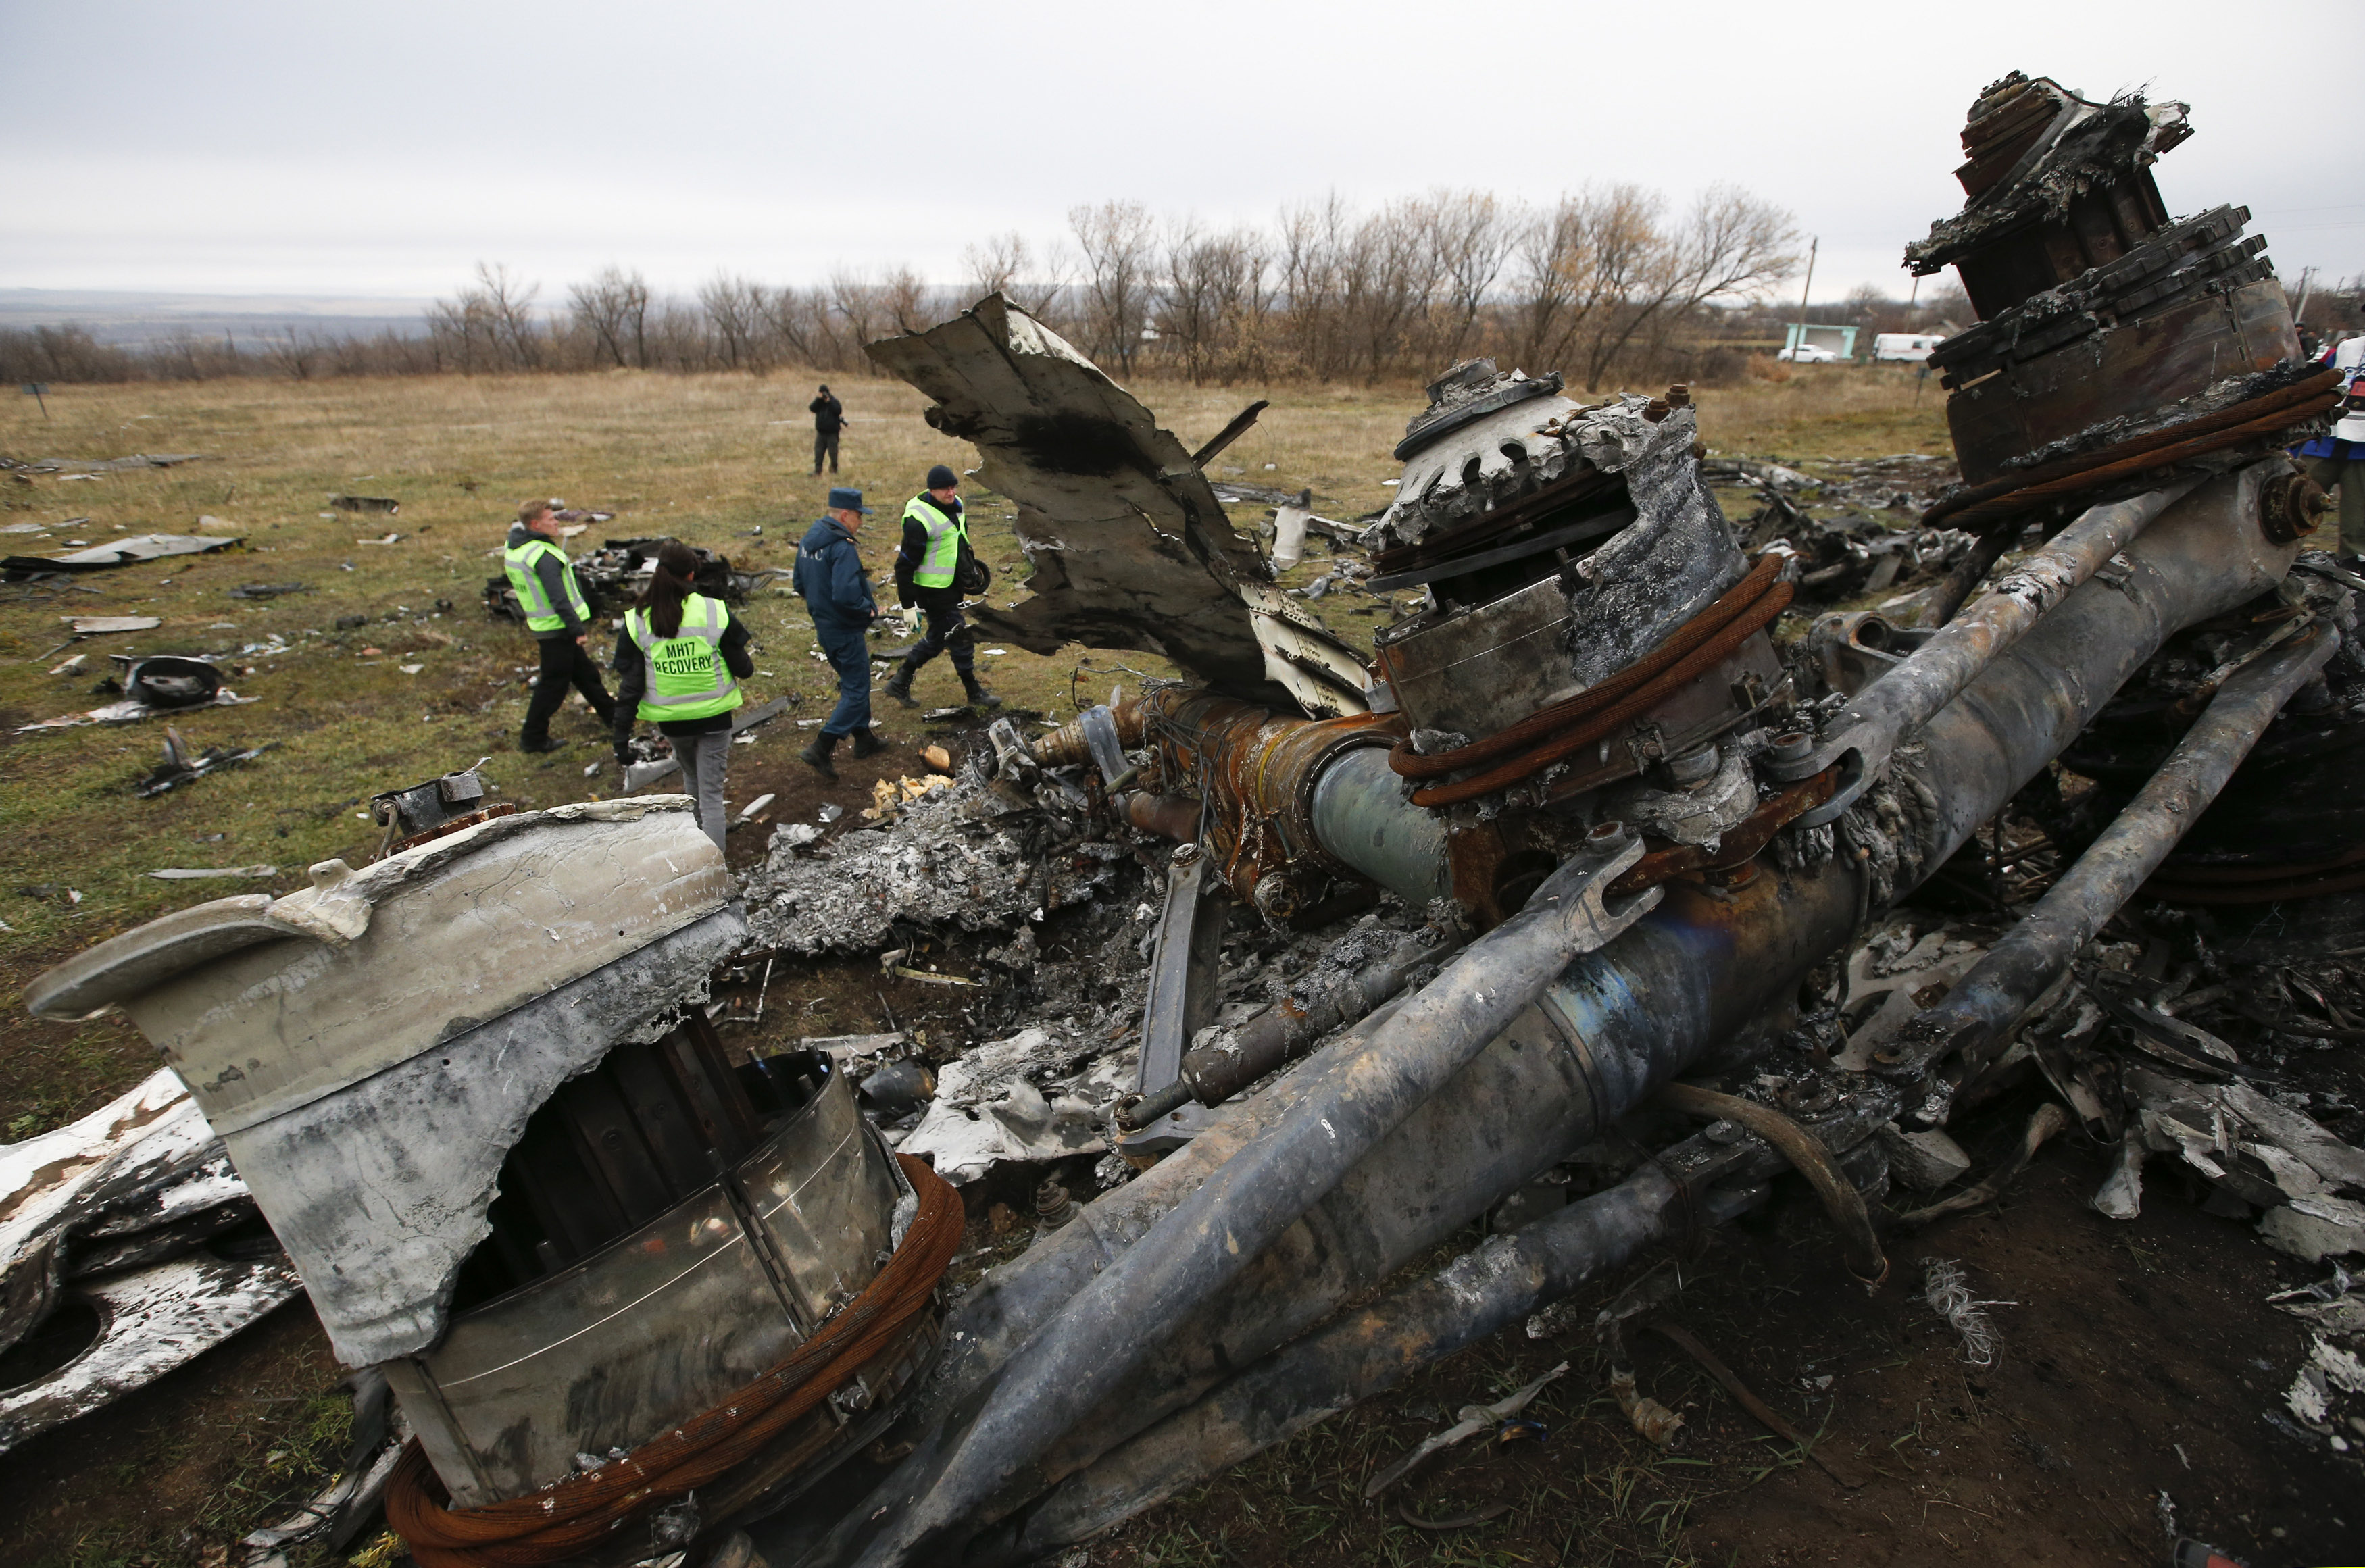 Dutch investigators and an Emergencies Ministry member work at the site where the downed Malaysia Airlines flight MH17 crashed, near the village of Hrabove in Donetsk region